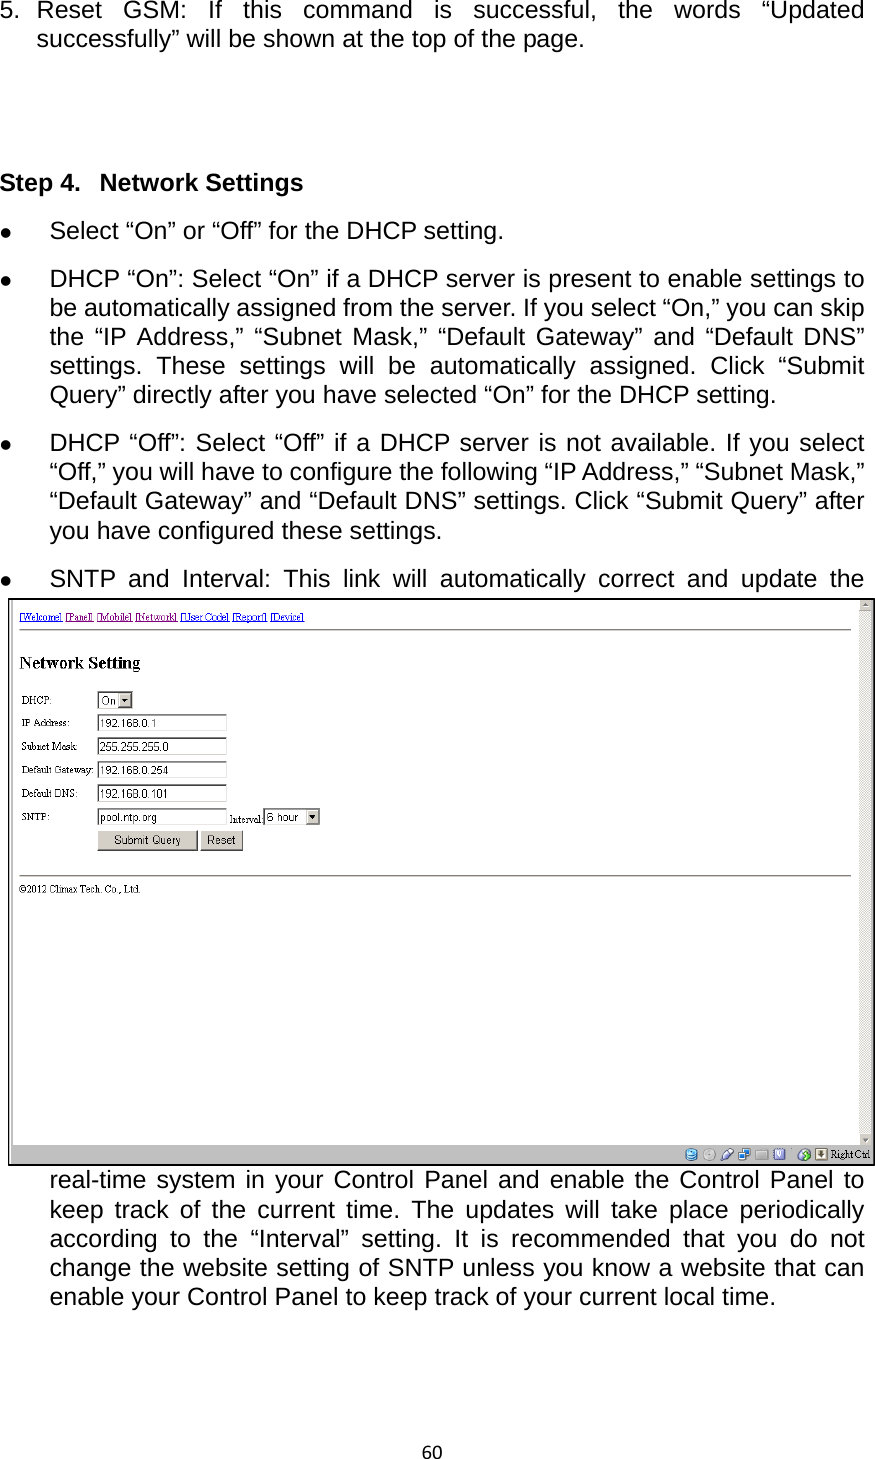 605. Reset GSM: If this command is successful, the words “Updated successfully” will be shown at the top of the page.     Step 4.  Network Settings z Select “On” or “Off” for the DHCP setting. z DHCP “On”: Select “On” if a DHCP server is present to enable settings to be automatically assigned from the server. If you select “On,” you can skip the “IP Address,” “Subnet Mask,” “Default Gateway” and “Default DNS” settings. These settings will be automatically assigned. Click “Submit Query” directly after you have selected “On” for the DHCP setting.   z DHCP “Off”: Select “Off” if a DHCP server is not available. If you select “Off,” you will have to configure the following “IP Address,” “Subnet Mask,” “Default Gateway” and “Default DNS” settings. Click “Submit Query” after you have configured these settings.   z SNTP and Interval: This link will automatically correct and update the real-time system in your Control Panel and enable the Control Panel to keep track of the current time. The updates will take place periodically according to the “Interval” setting. It is recommended that you do not change the website setting of SNTP unless you know a website that can enable your Control Panel to keep track of your current local time.     